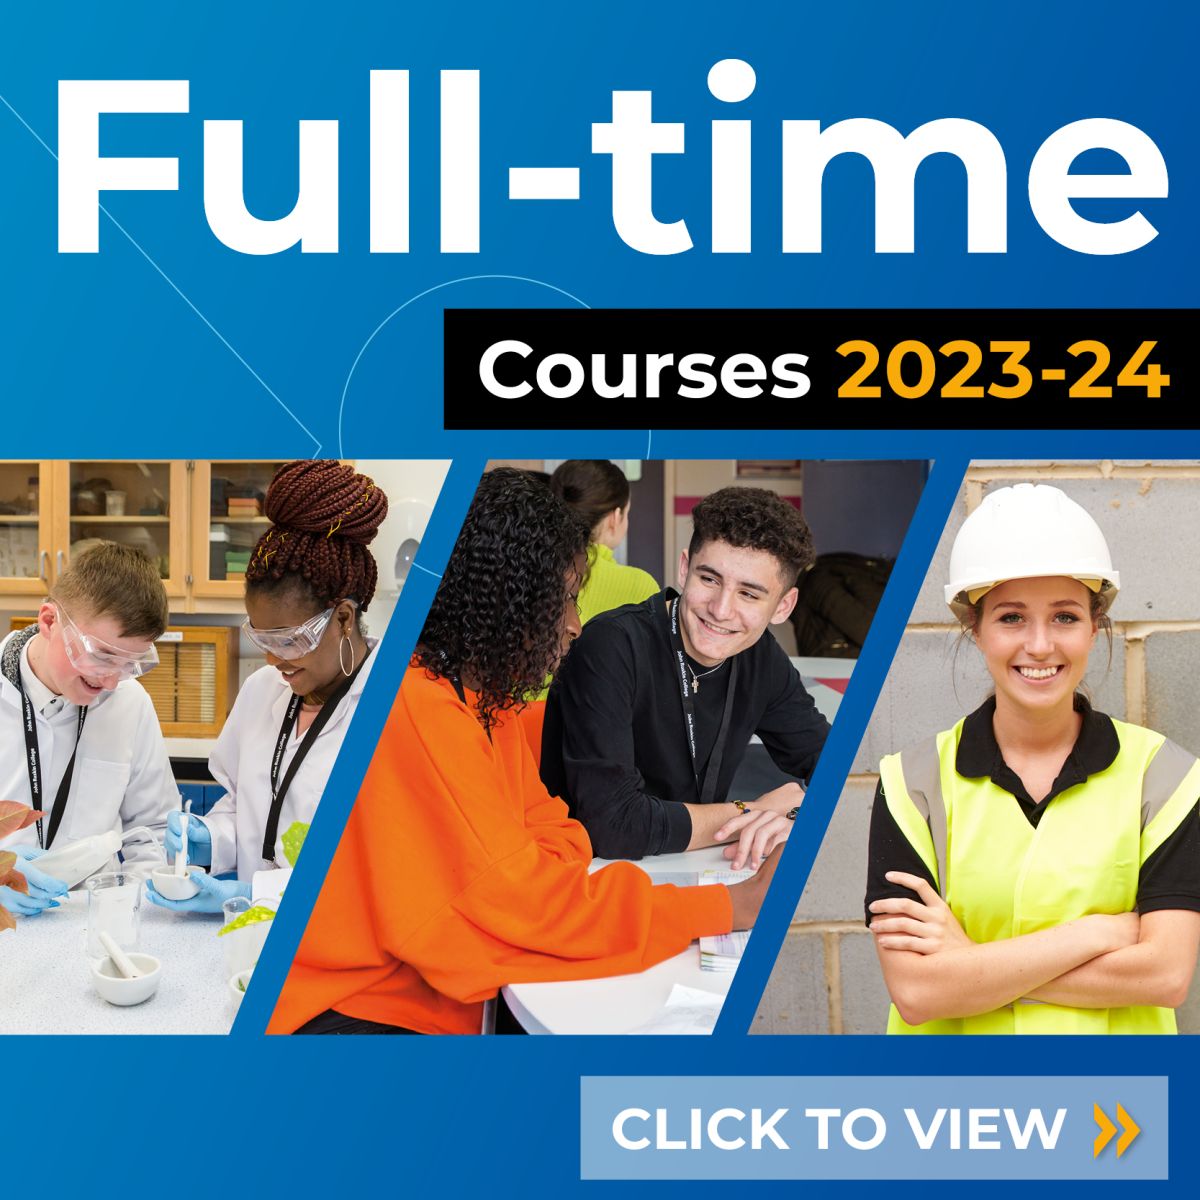 Full-time course guide 2023-2024 